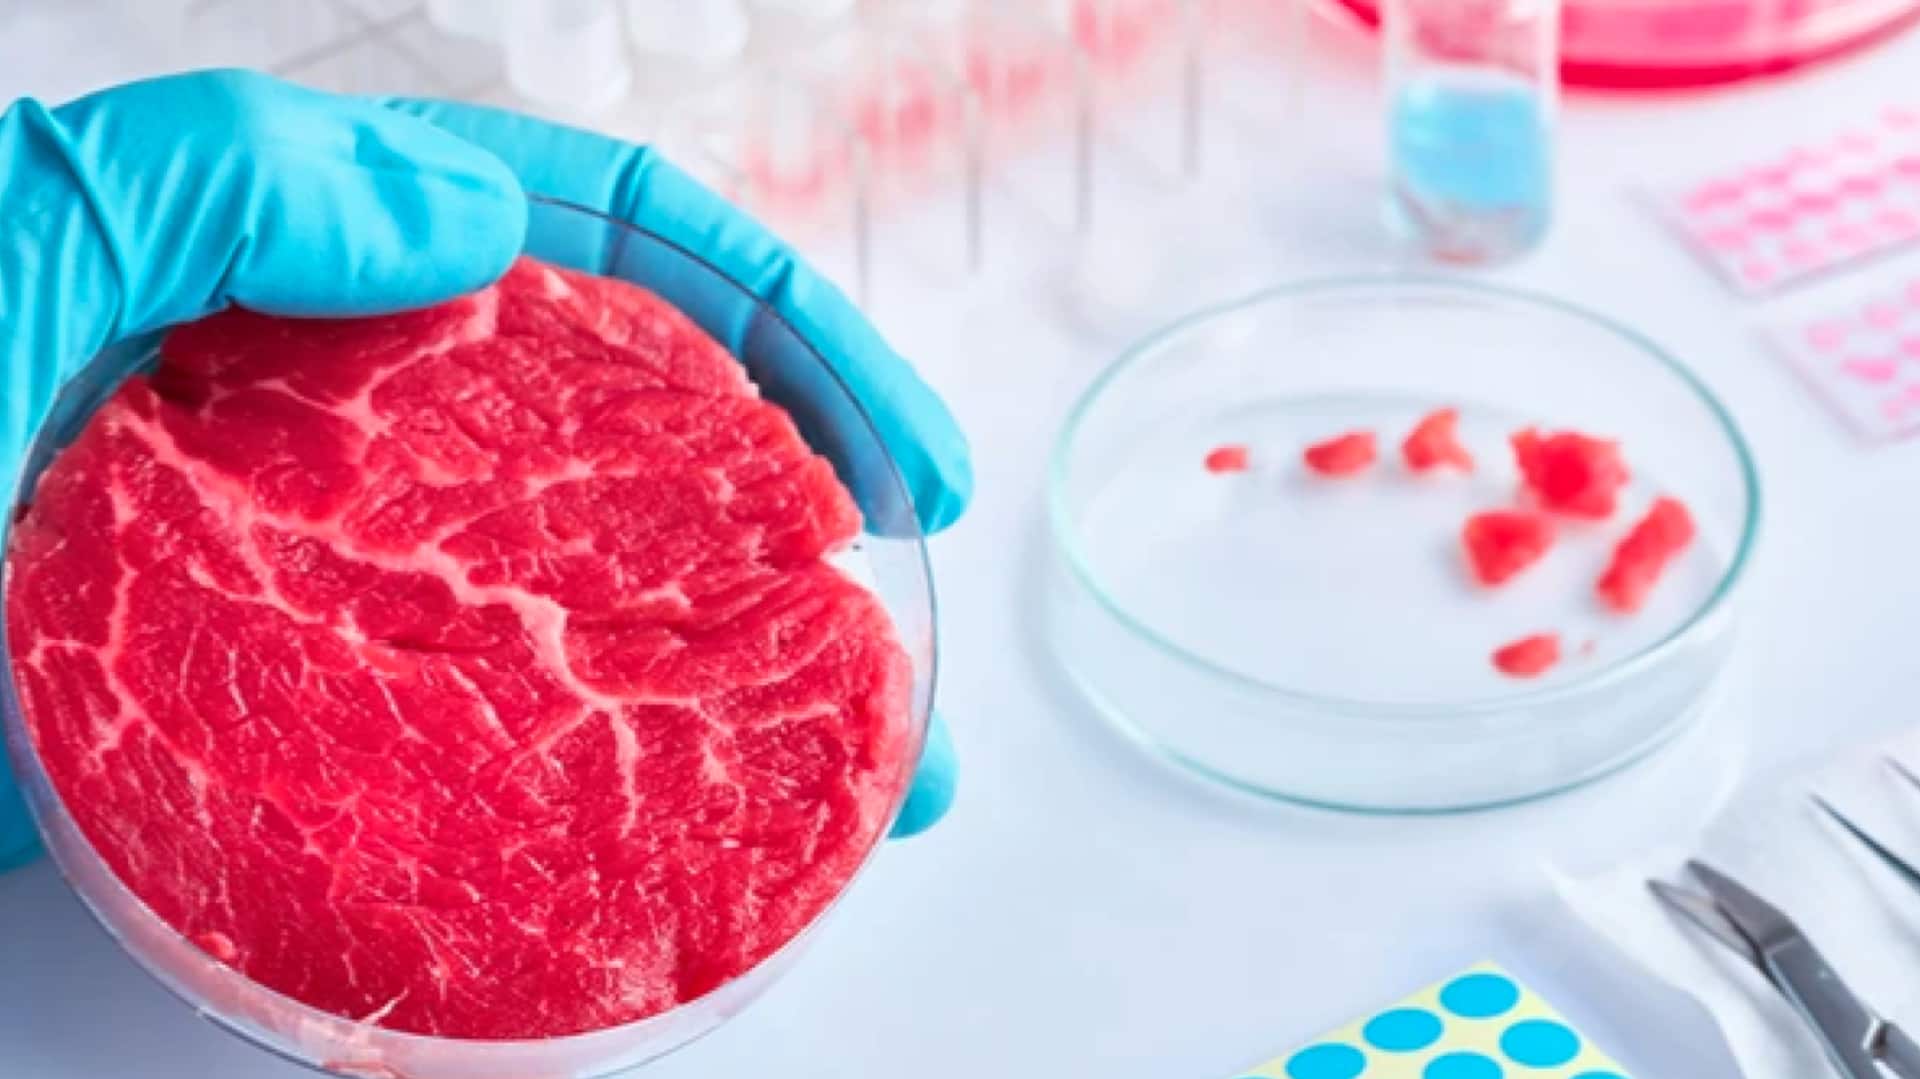 Researchers grow meat from 'immortal' stem cells: How it's advantageous